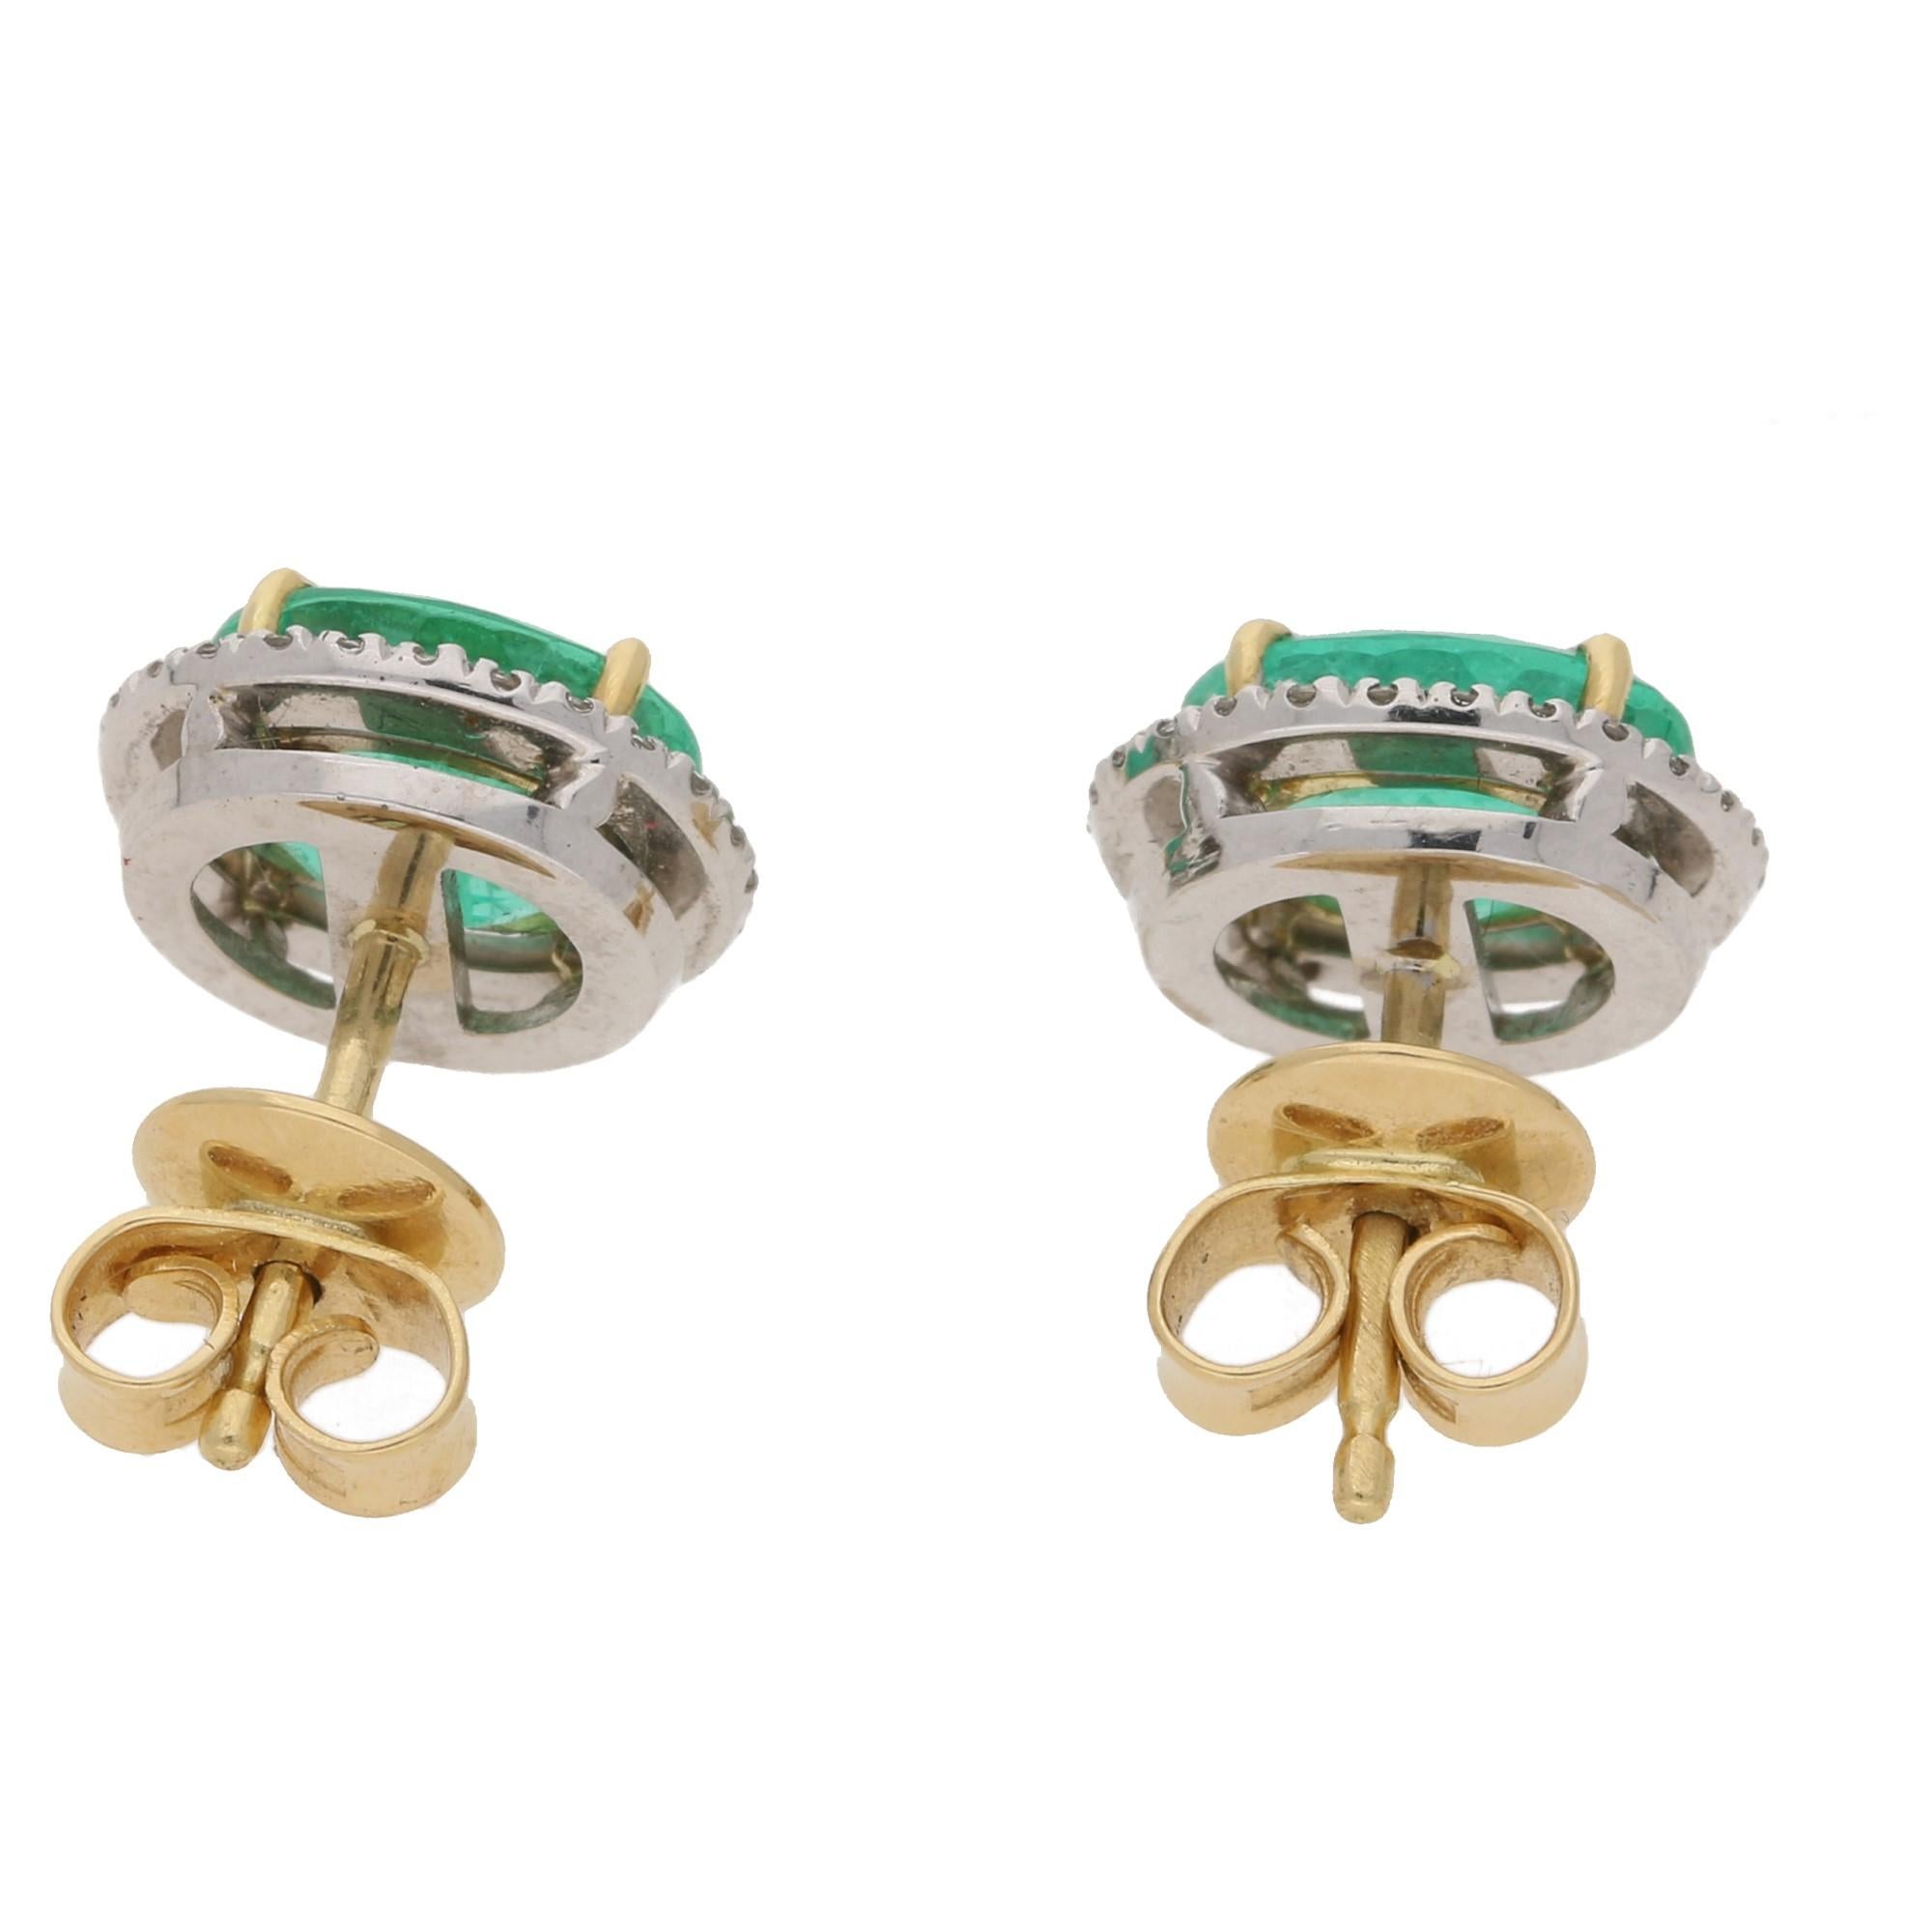 Brilliant Cut Certified Emerald and Diamond Gold Cluster Stud Earrings